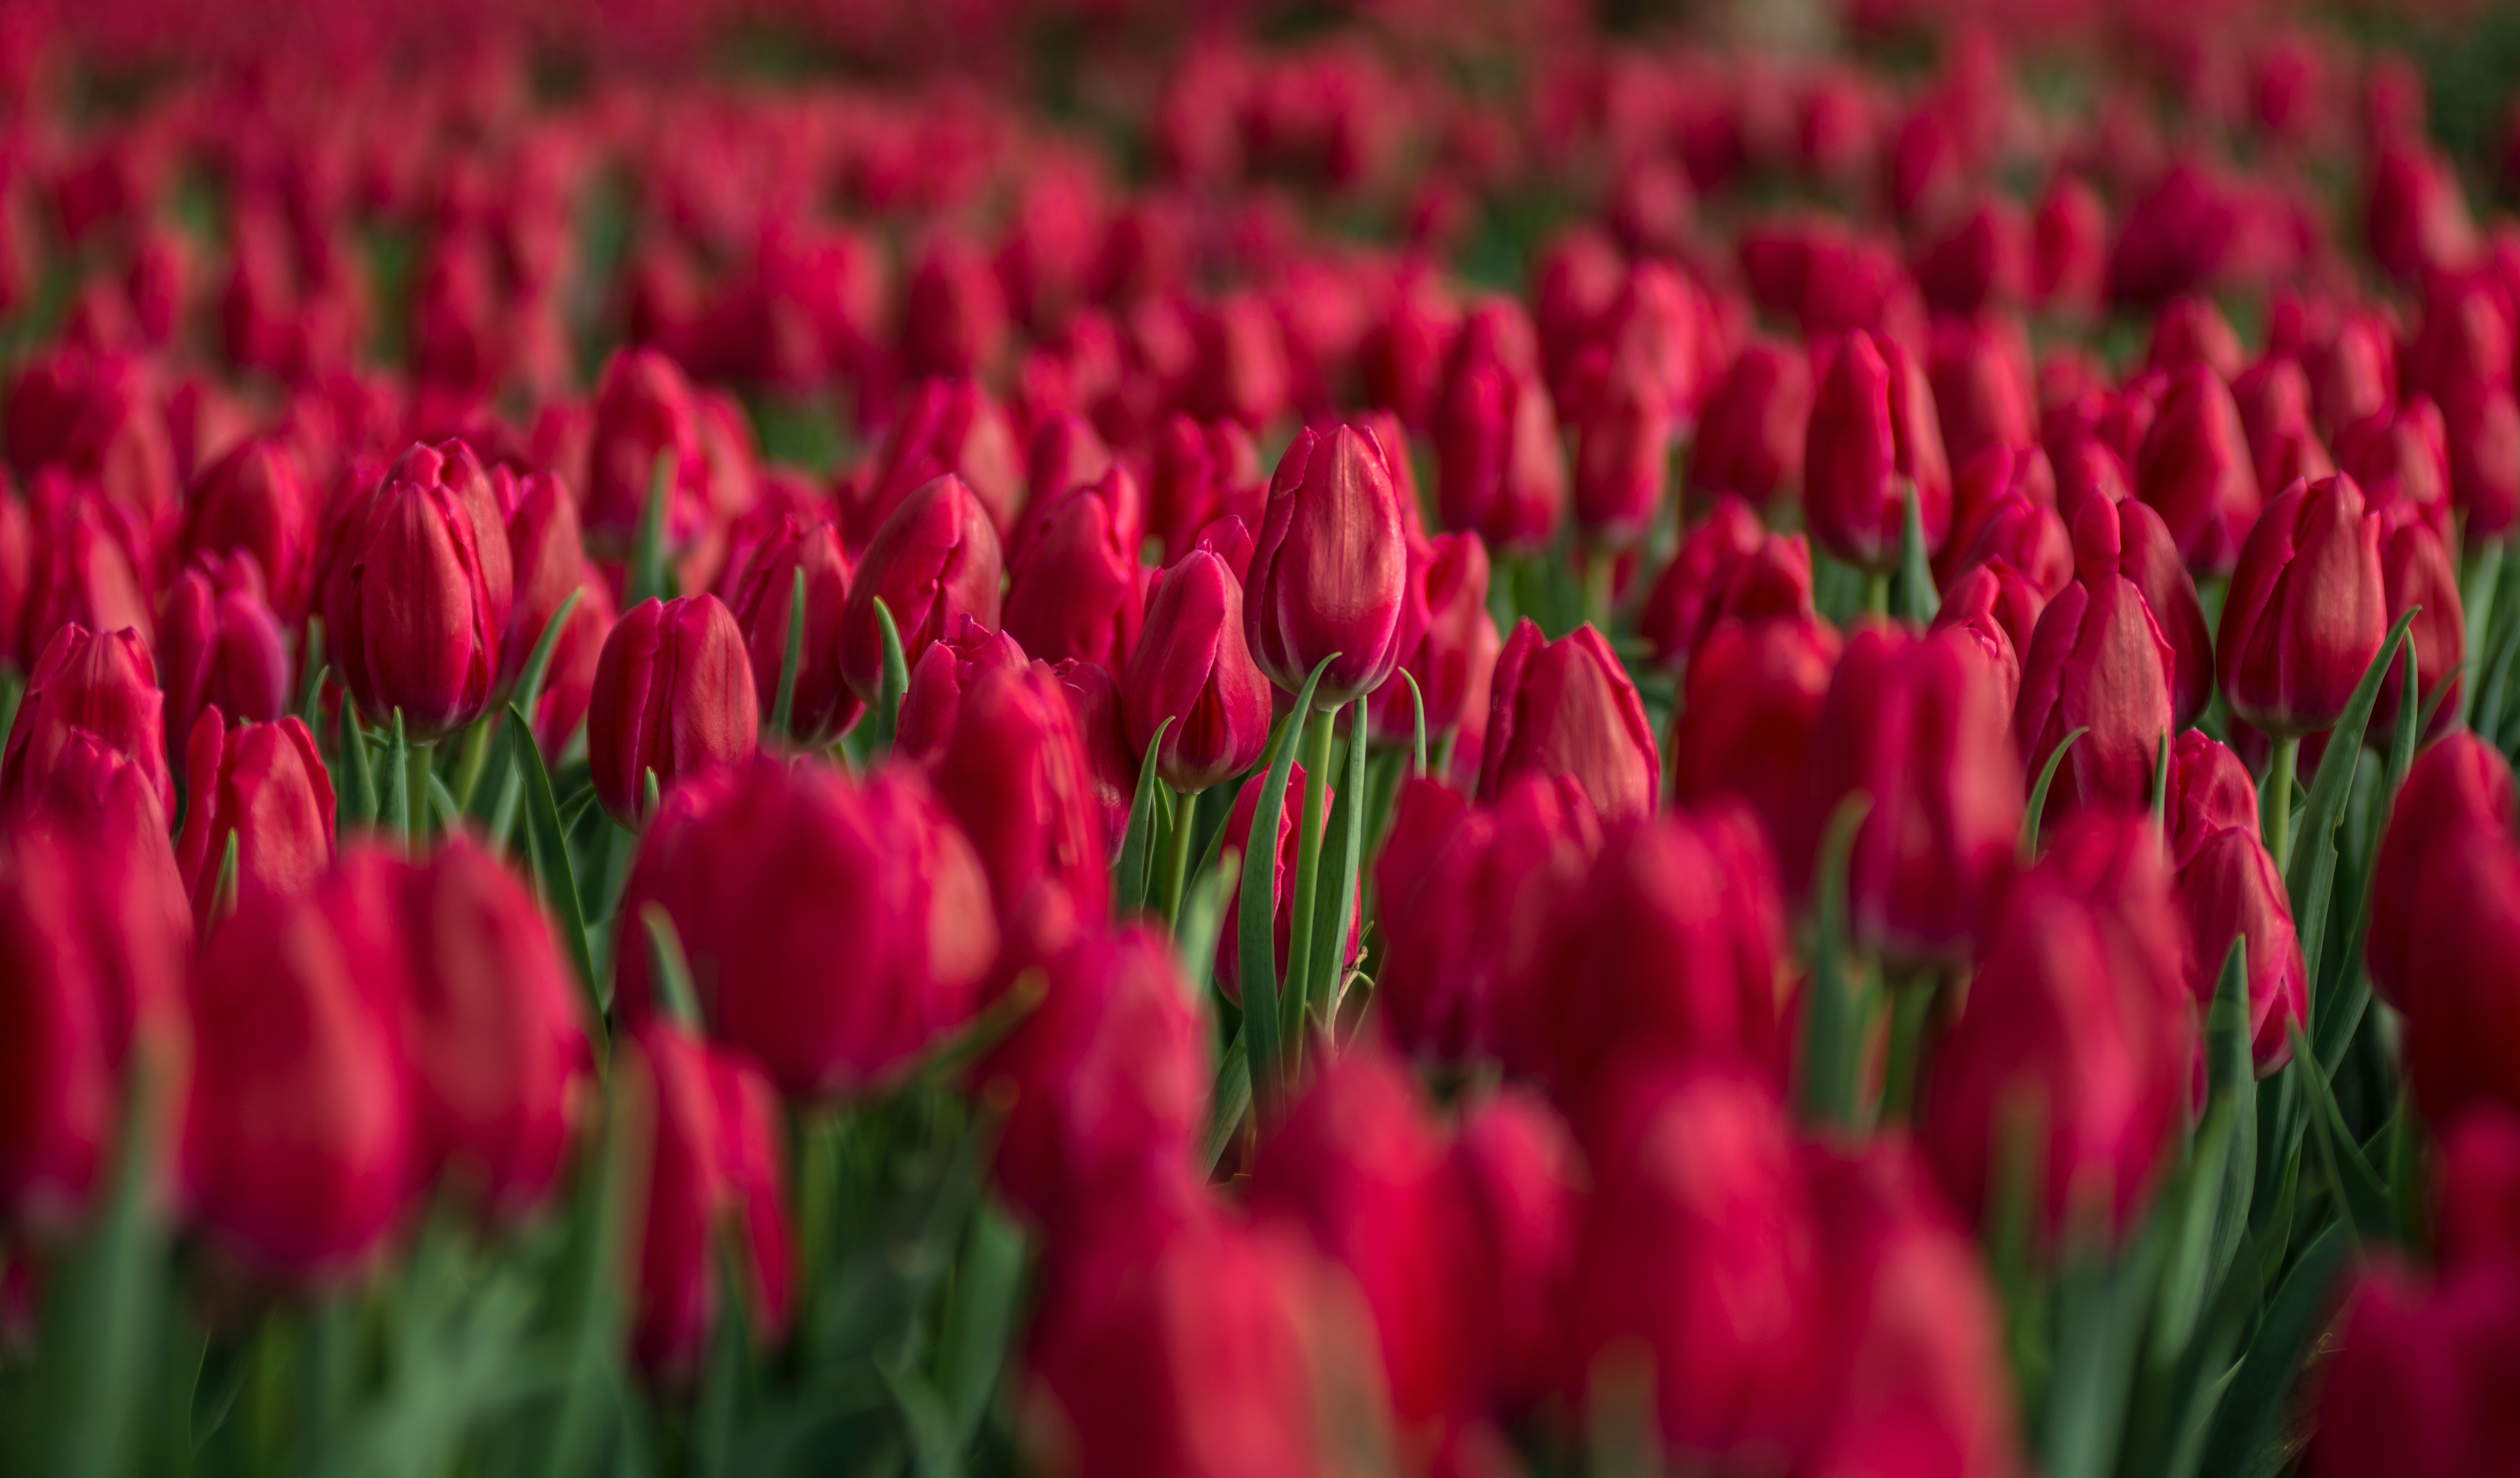 HD wallpaper, Selective Focus, Bloom, Blossom, Colorful, 5K, Floral Background, Spring, Red Tulips, Bokeh, Tulips Field